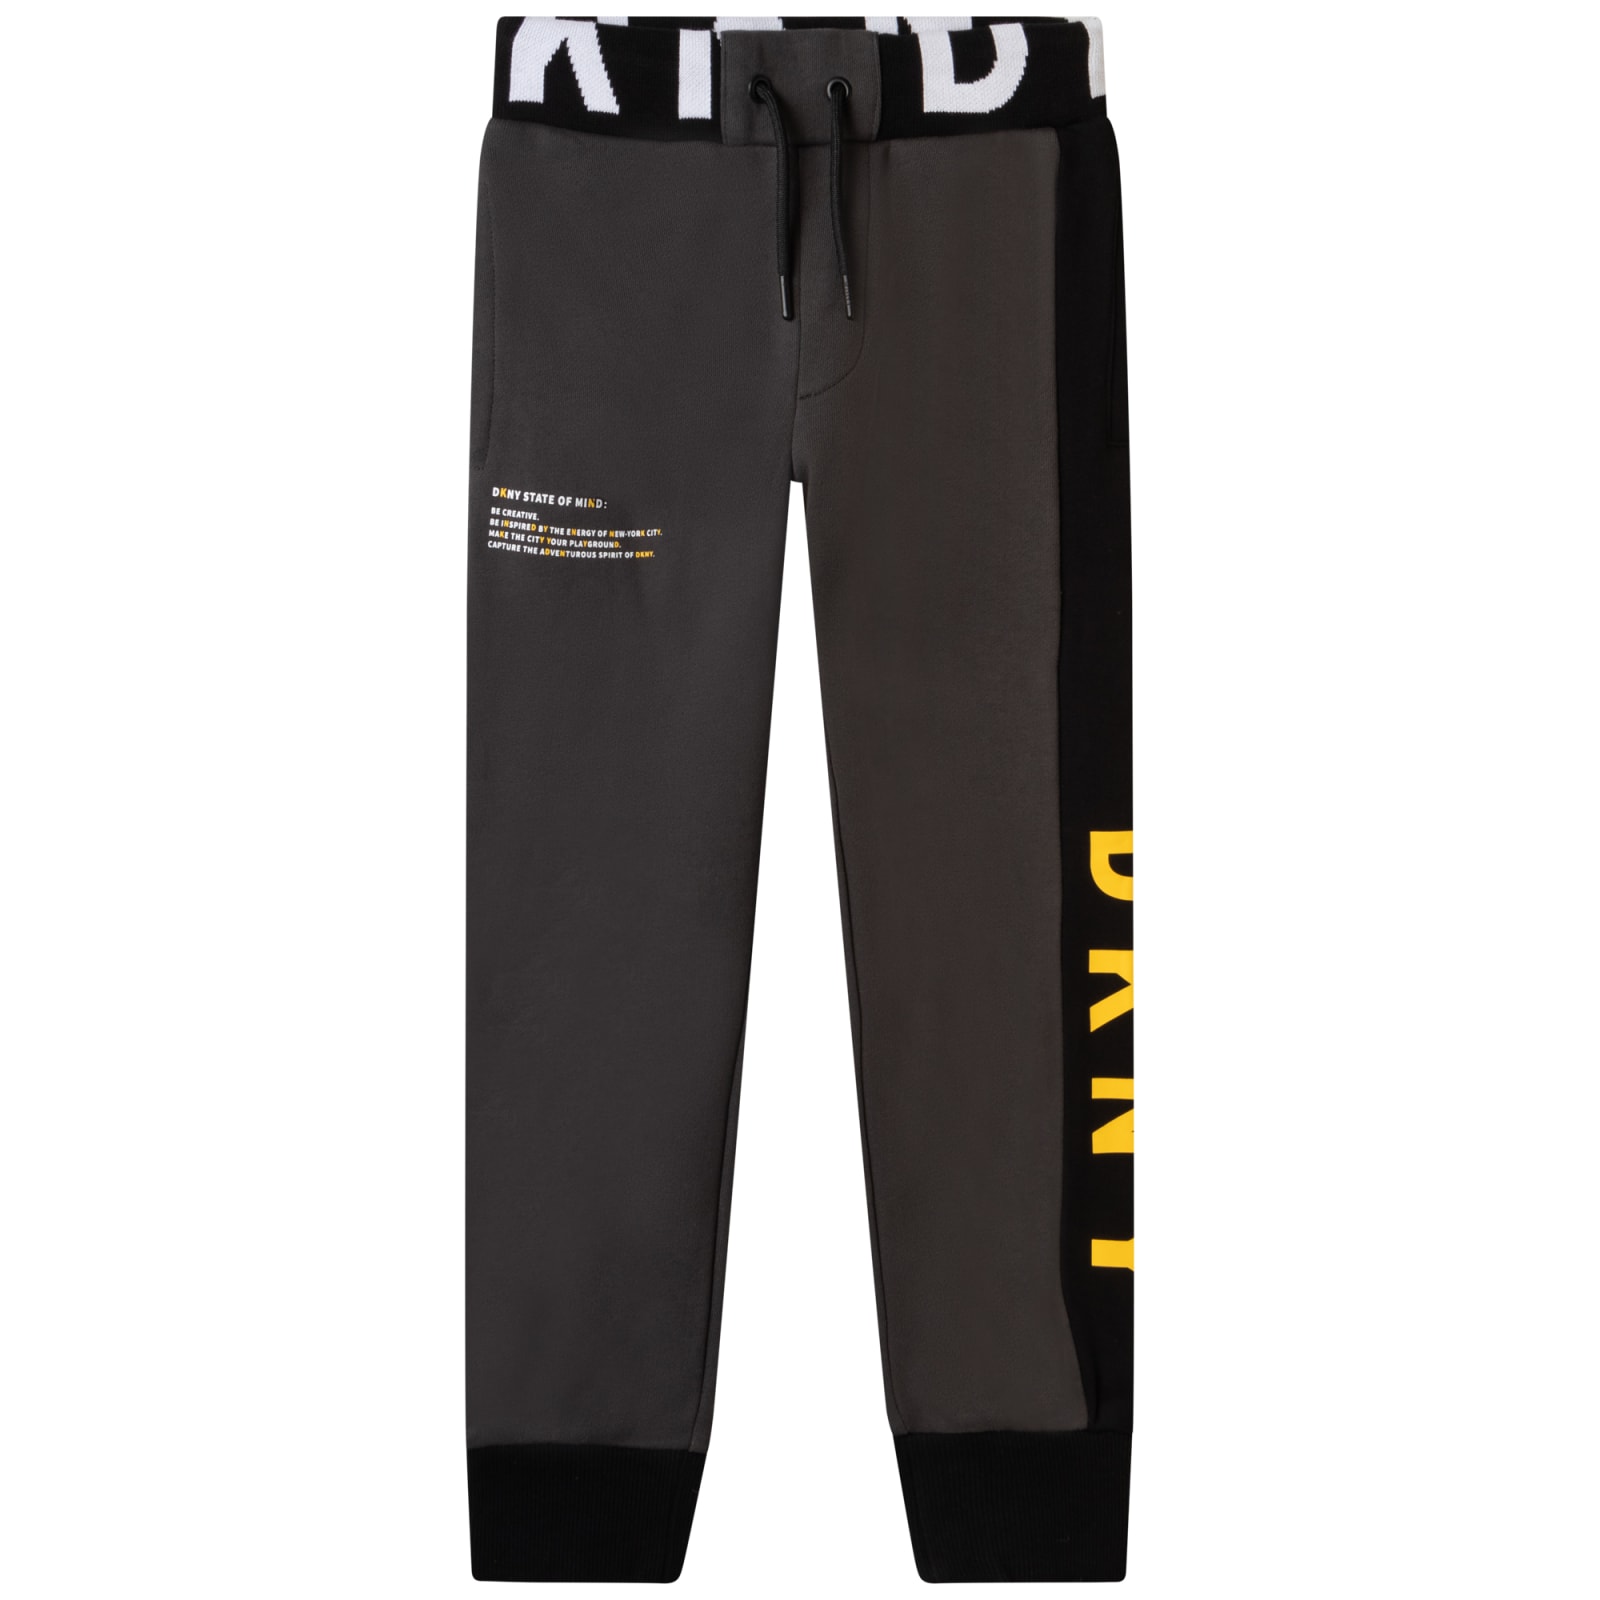 DKNY Sports Trousers With Print